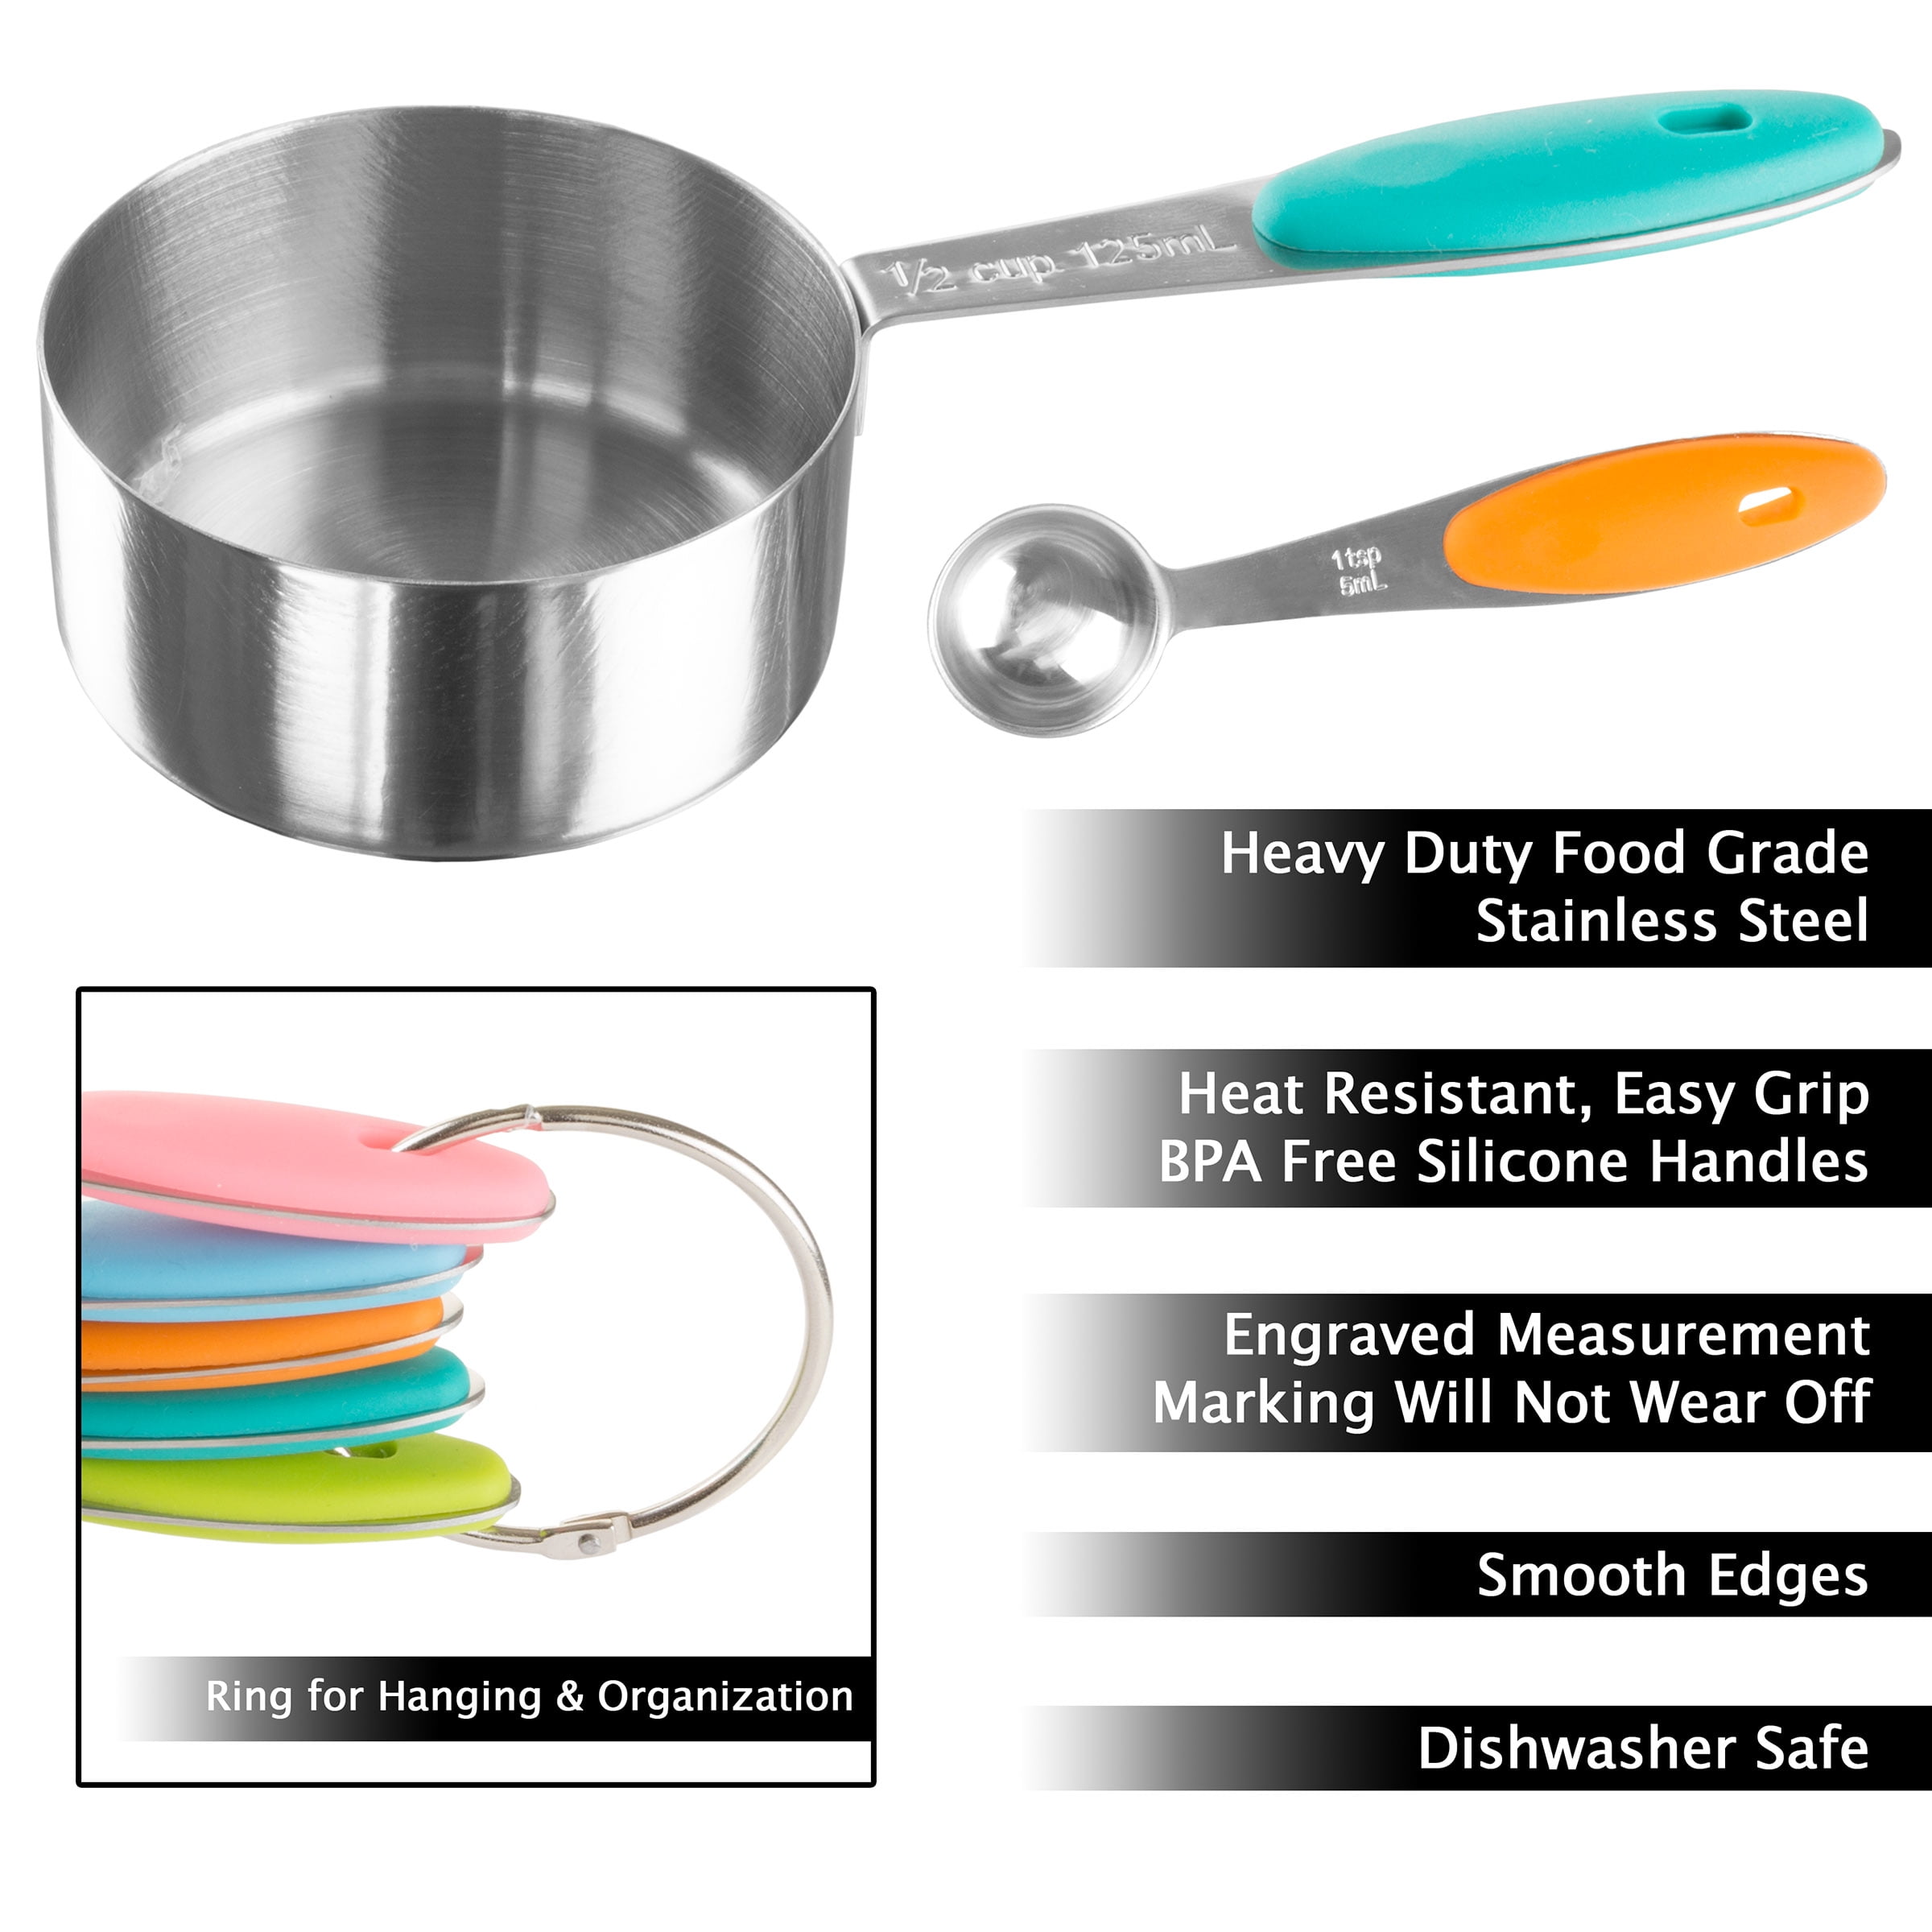 Classic Cuisine 5-Piece Stainless Steel with Silicone Measuring Spoon Set  HW031032 - The Home Depot